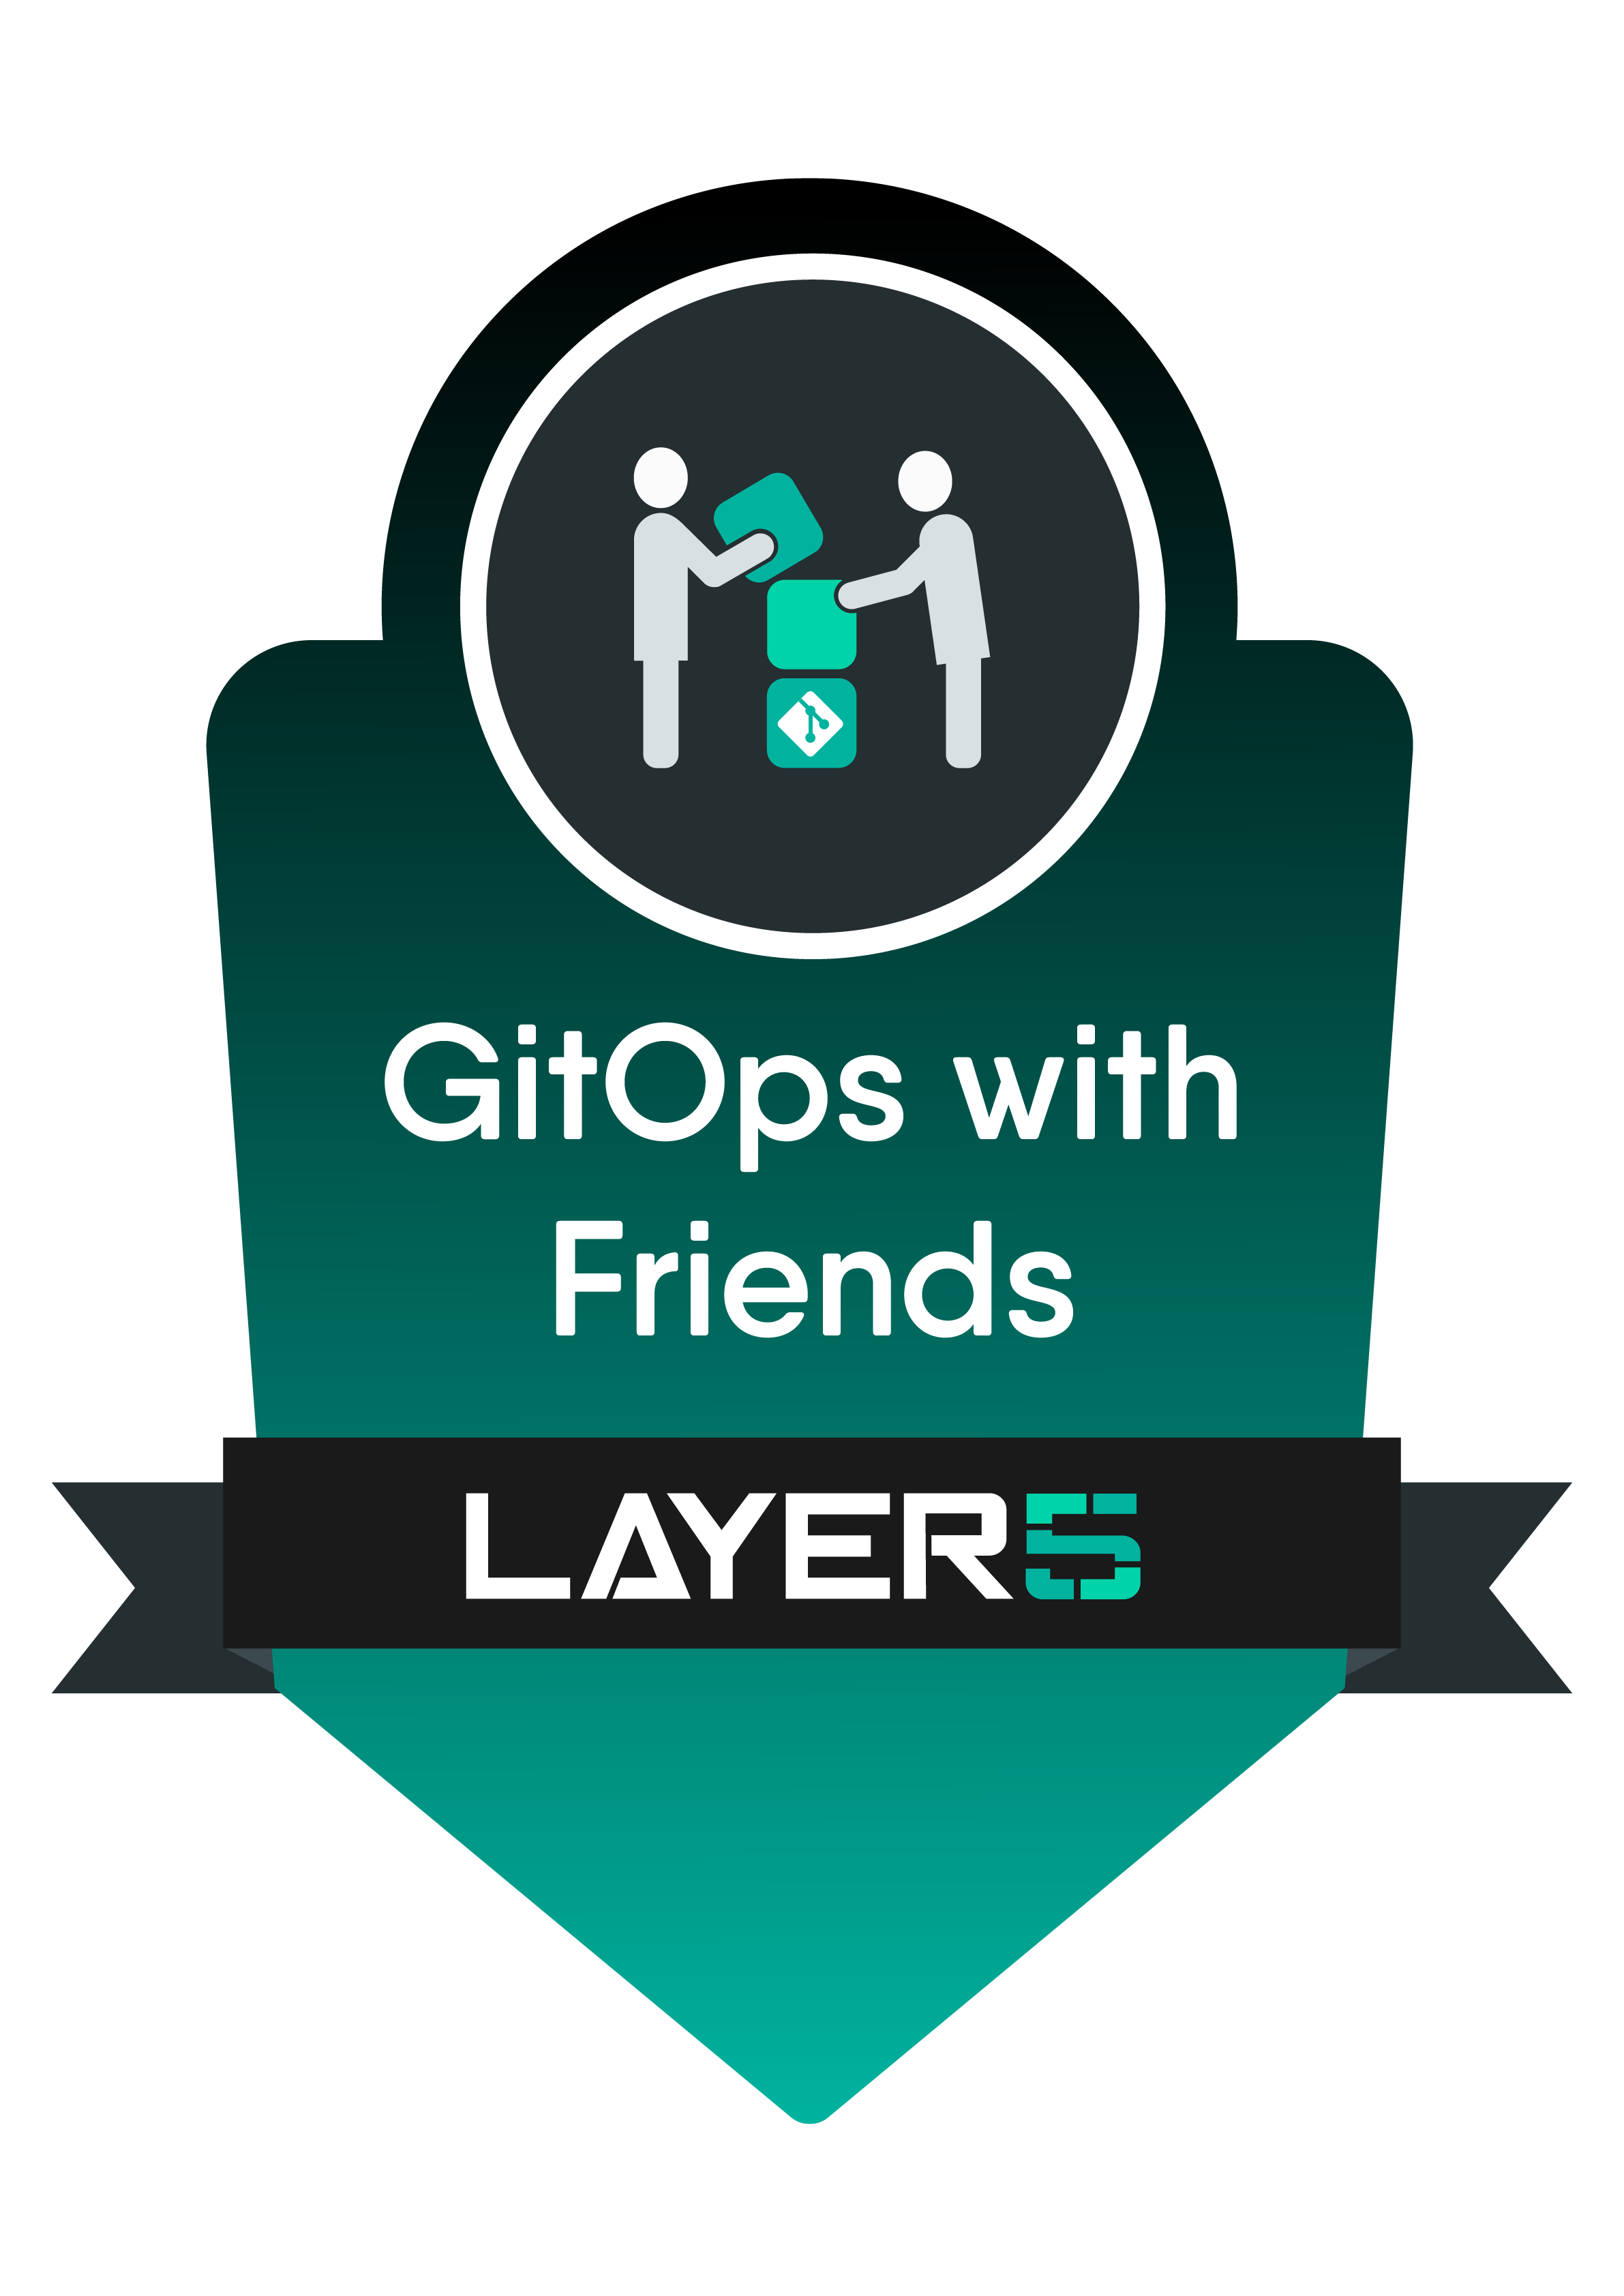 GitOps with Friends